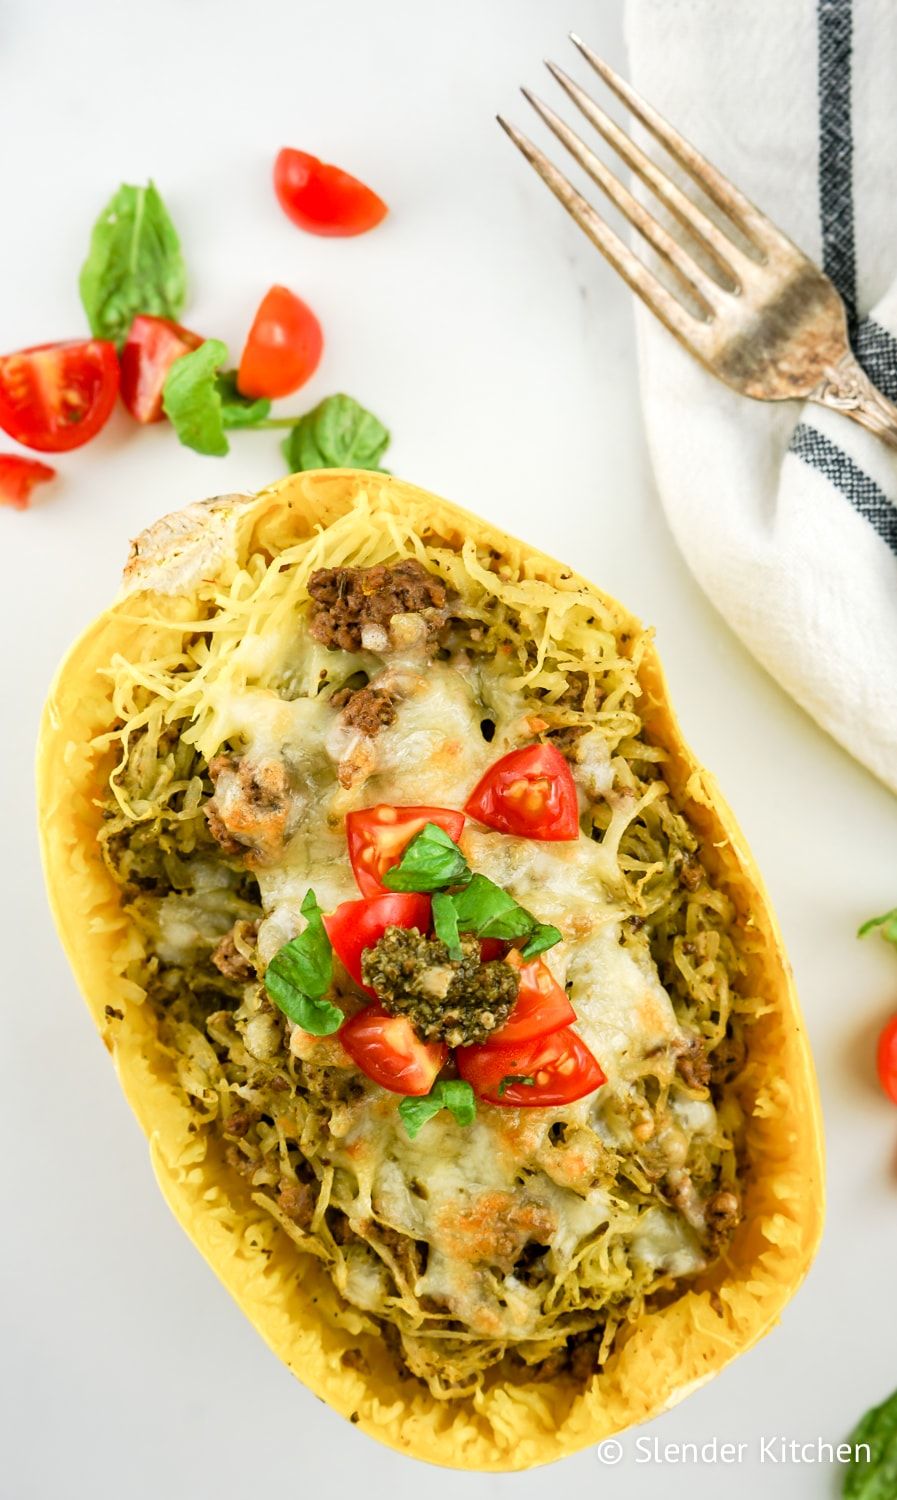 Low carb Pesto Spaghetti Squash on a marble background with tomato slices.